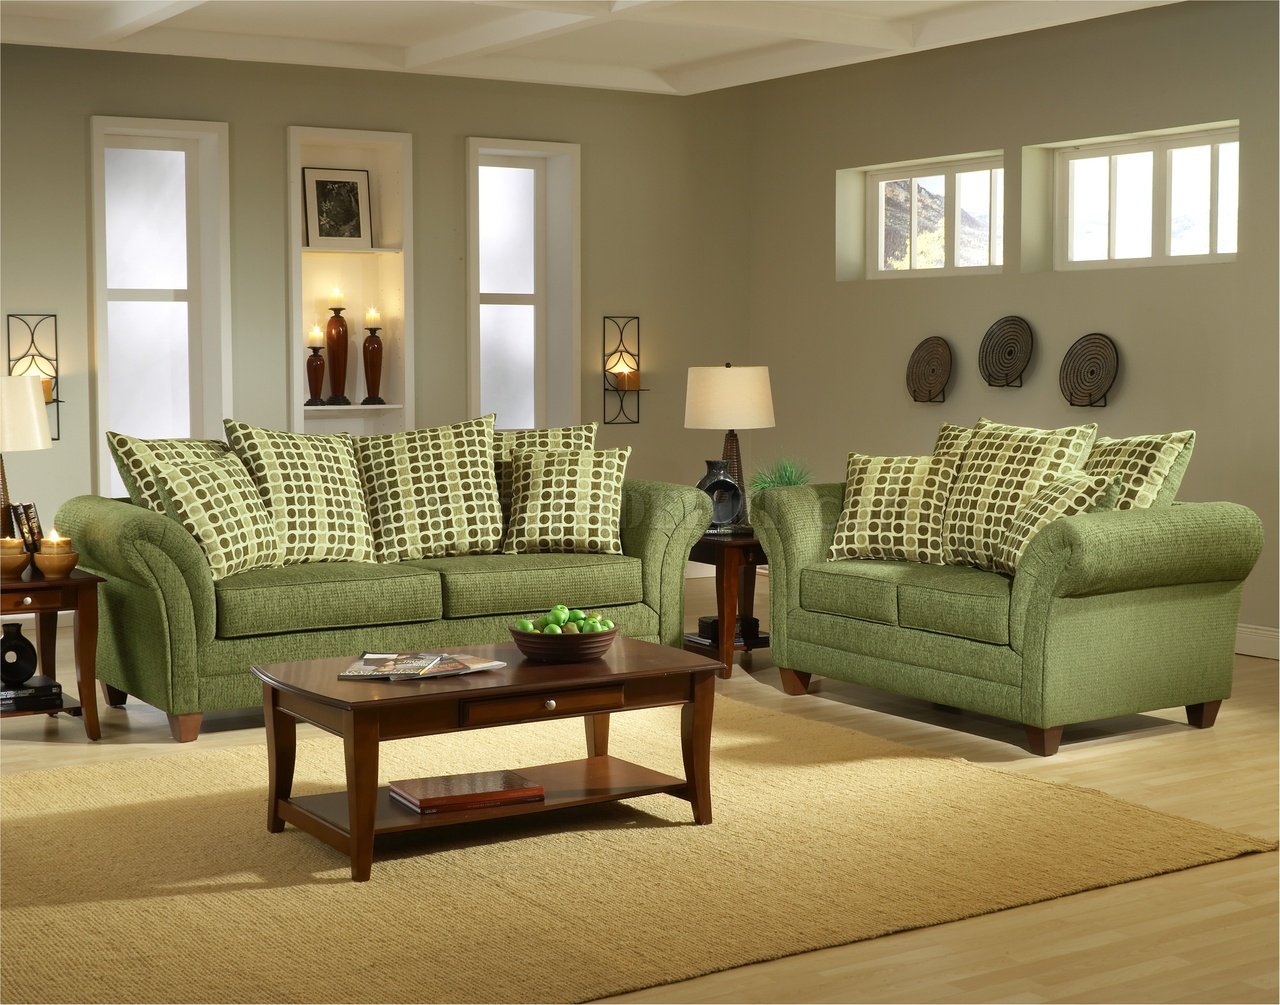 living room ideas with green couches